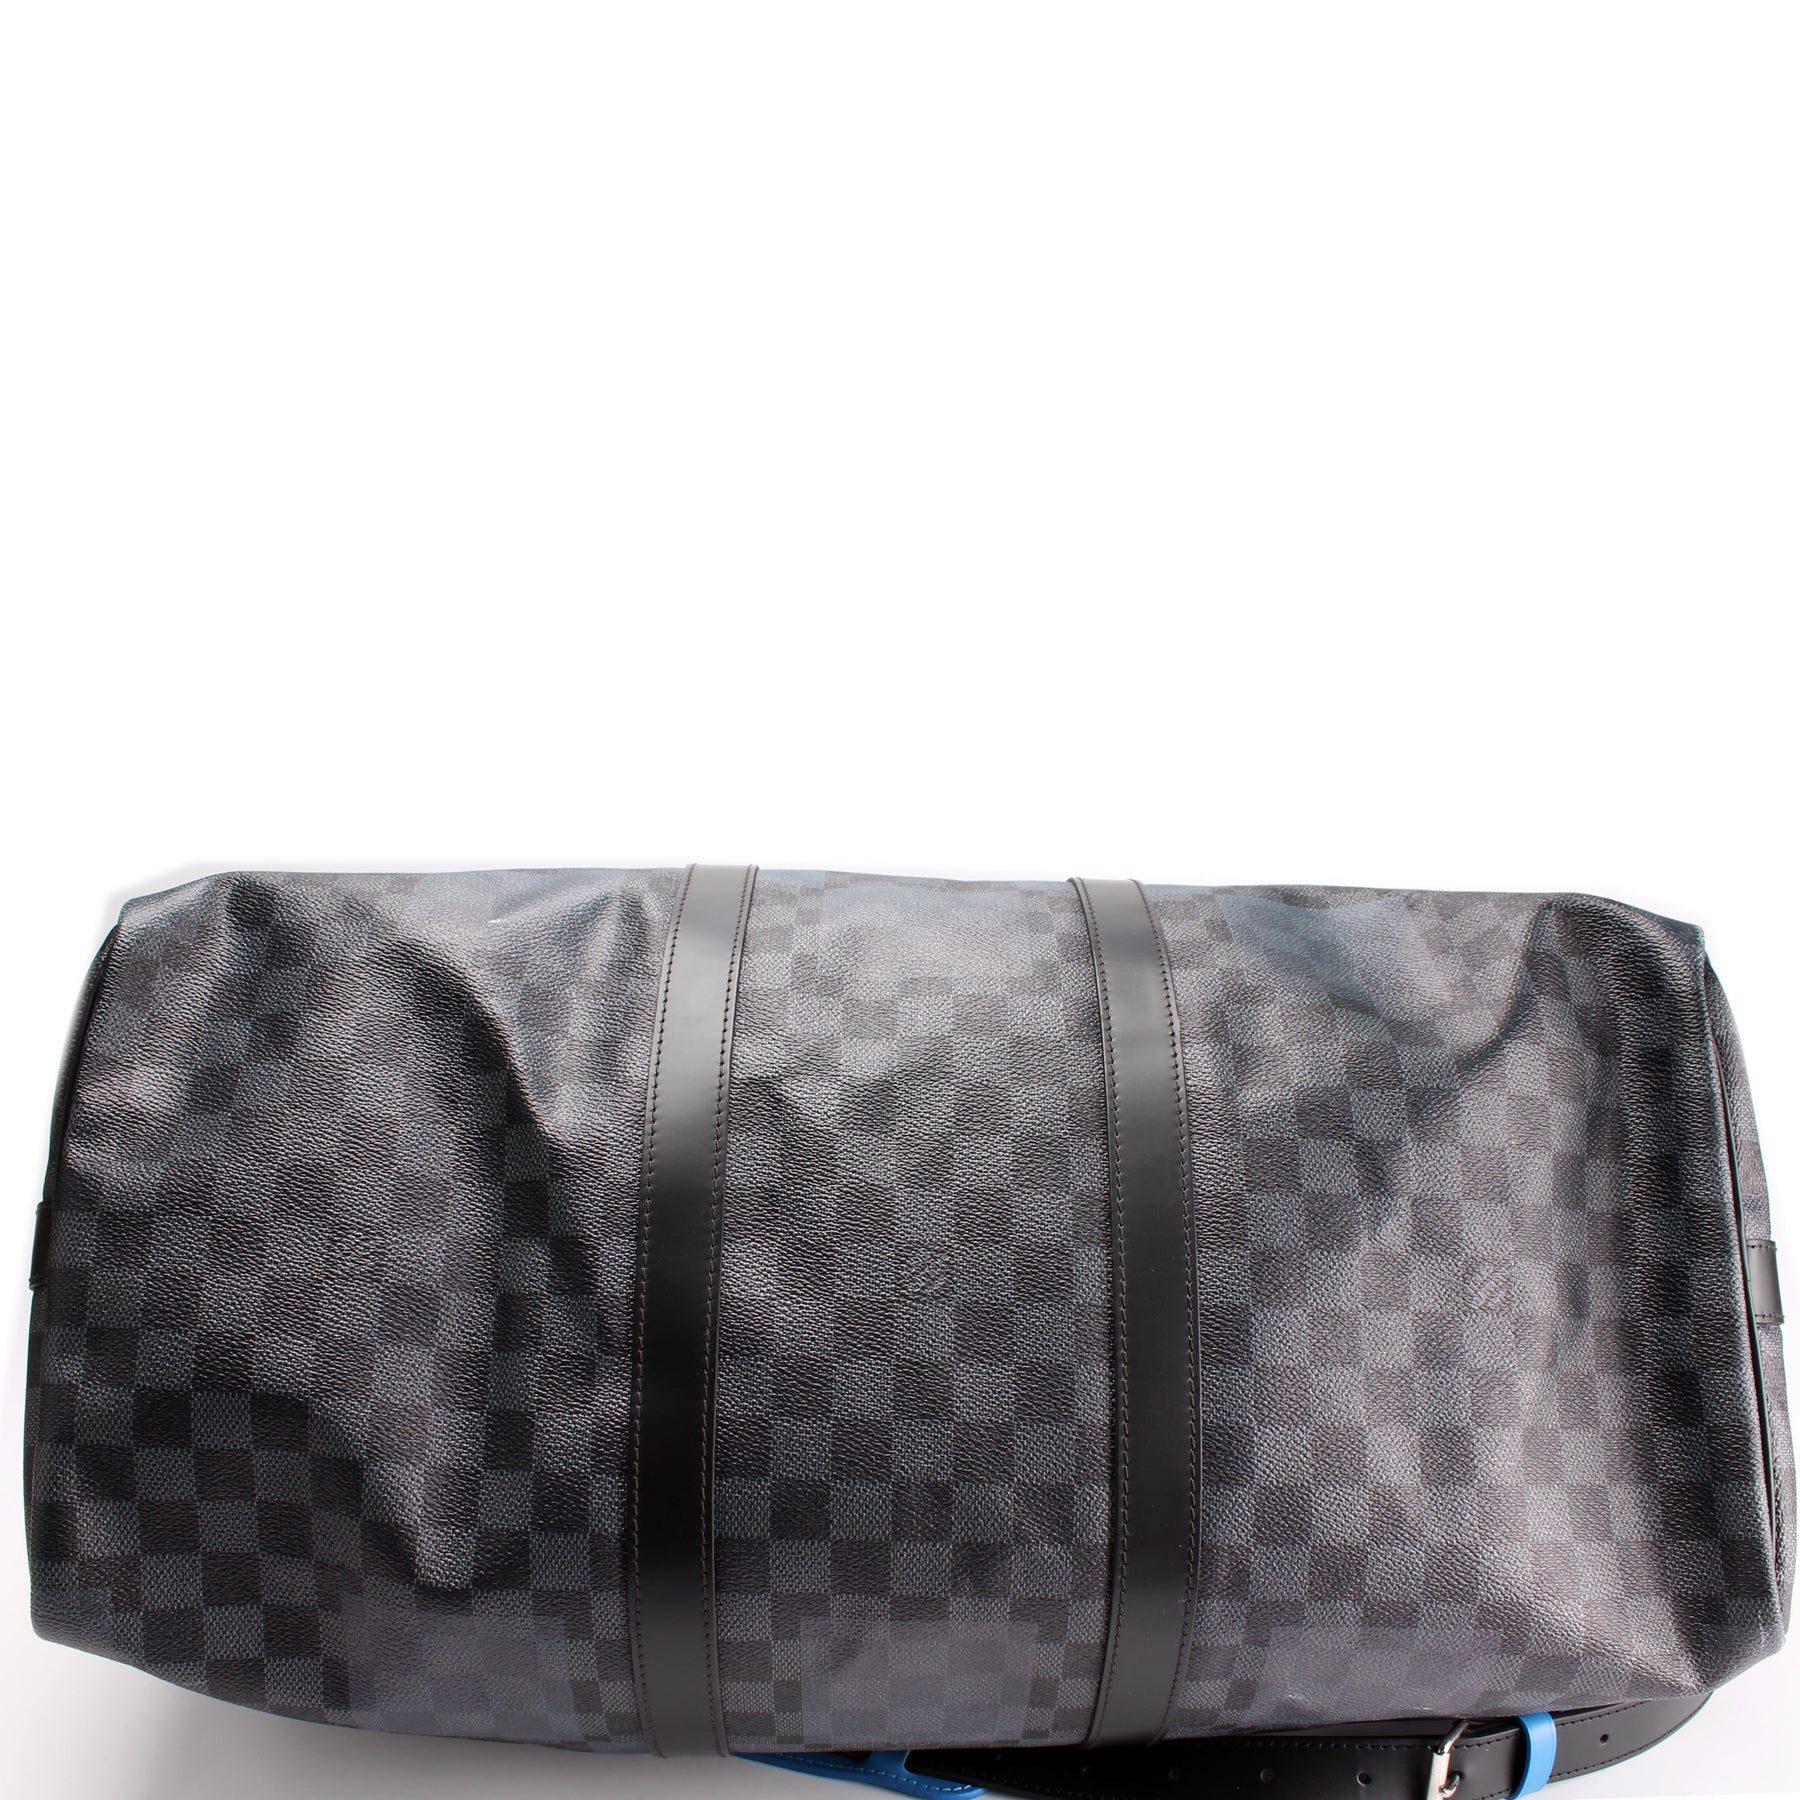 Pre-owned Louis Vuitton LV Keepall 55 Damier Graphite Bandouliere